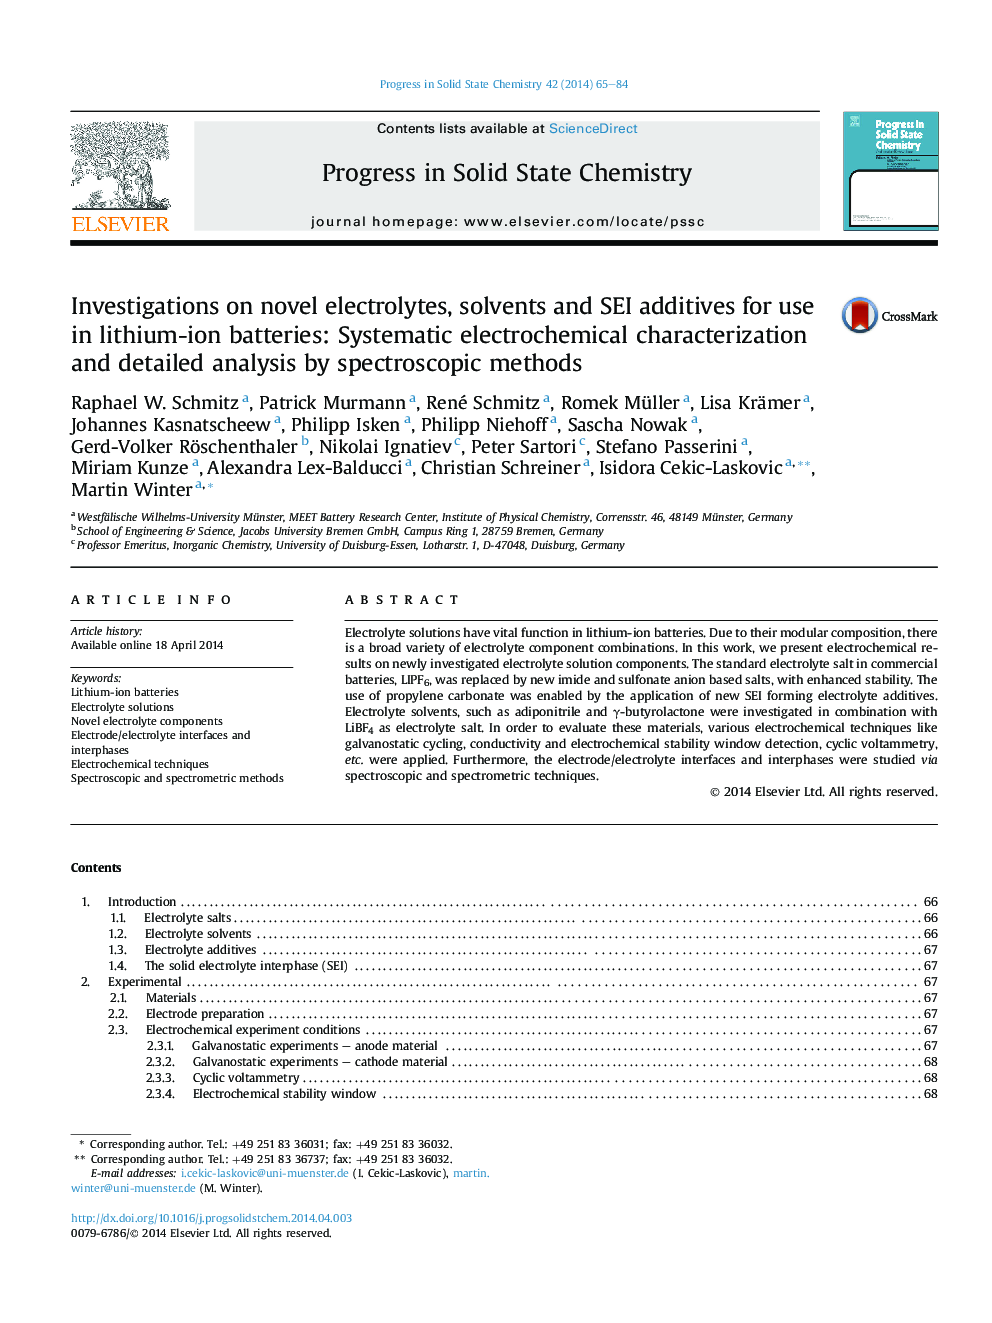 Investigations on novel electrolytes, solvents and SEI additives for use in lithium-ion batteries: Systematic electrochemical characterization and detailed analysis by spectroscopic methods